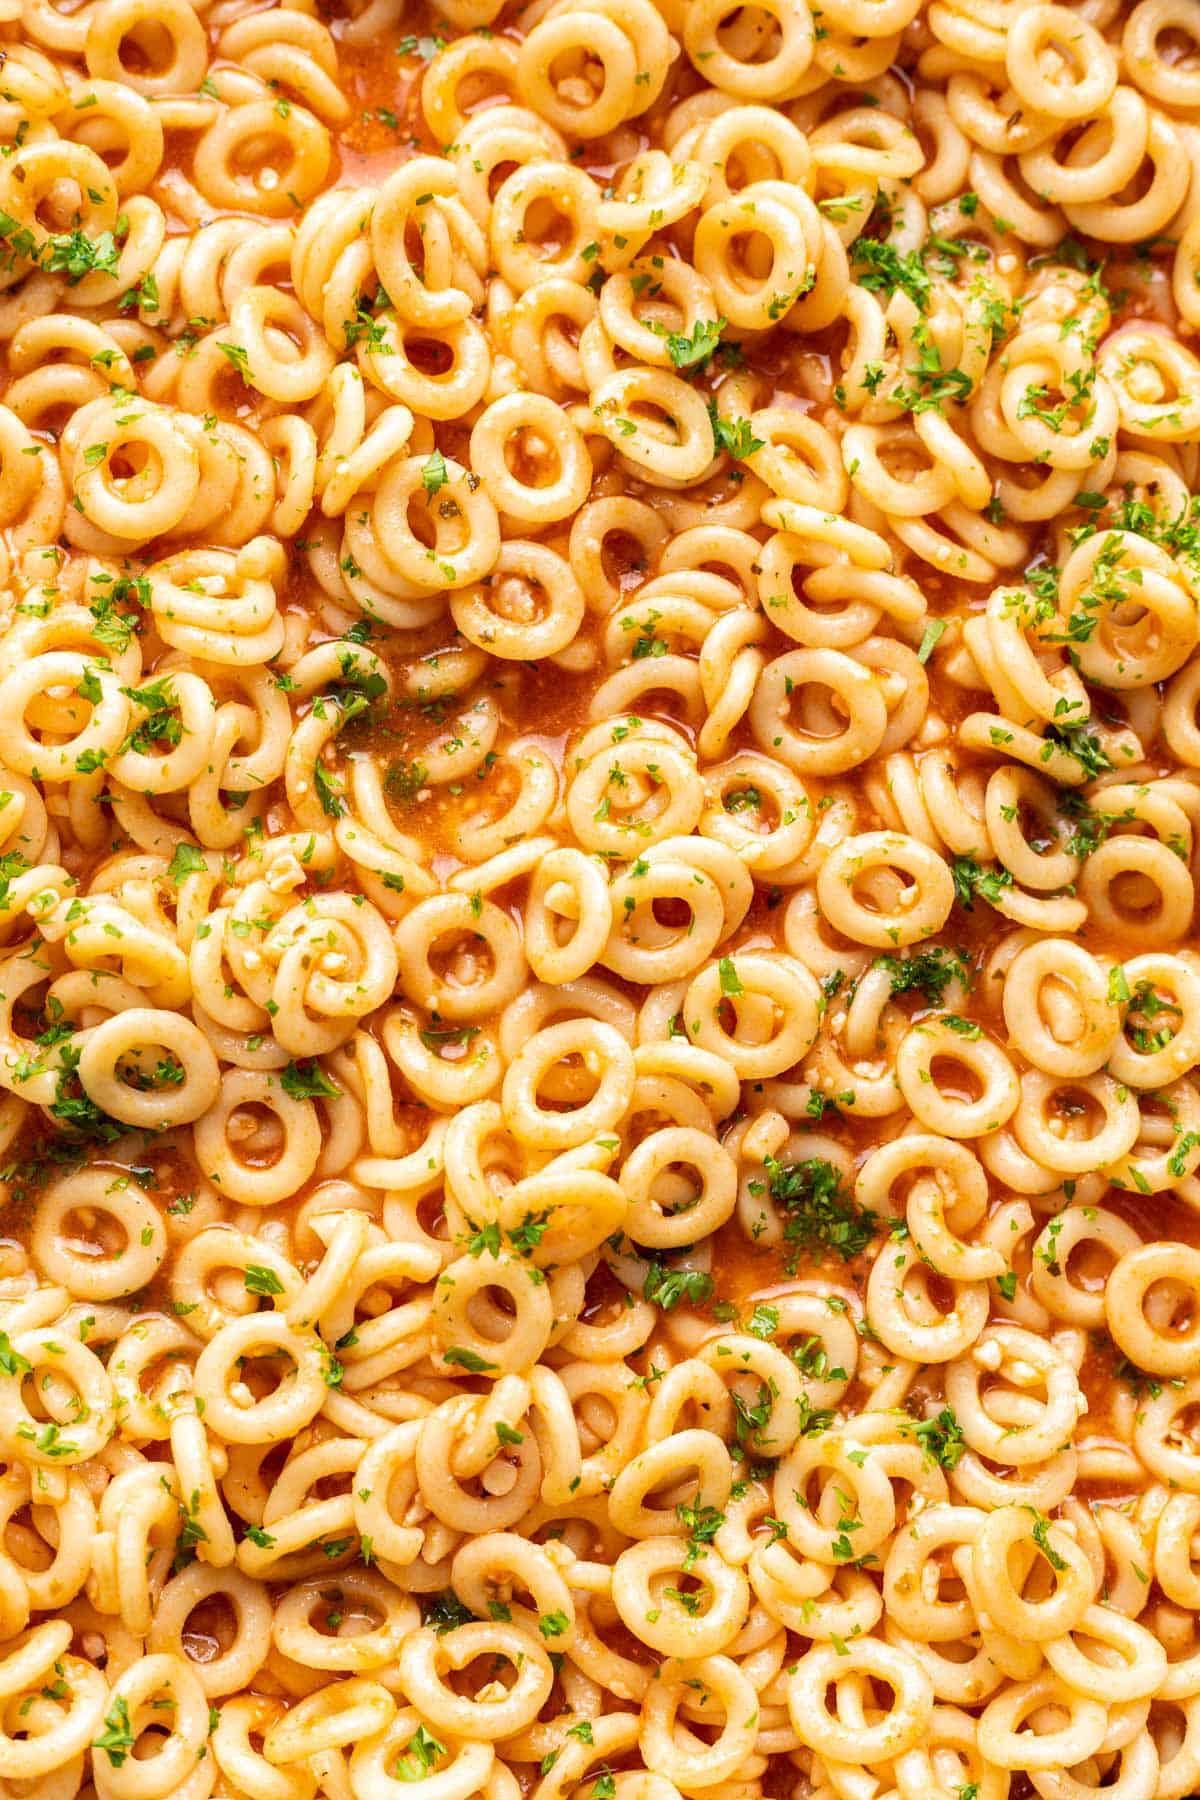 Homemade spaghettios with parsley on top for garnish.